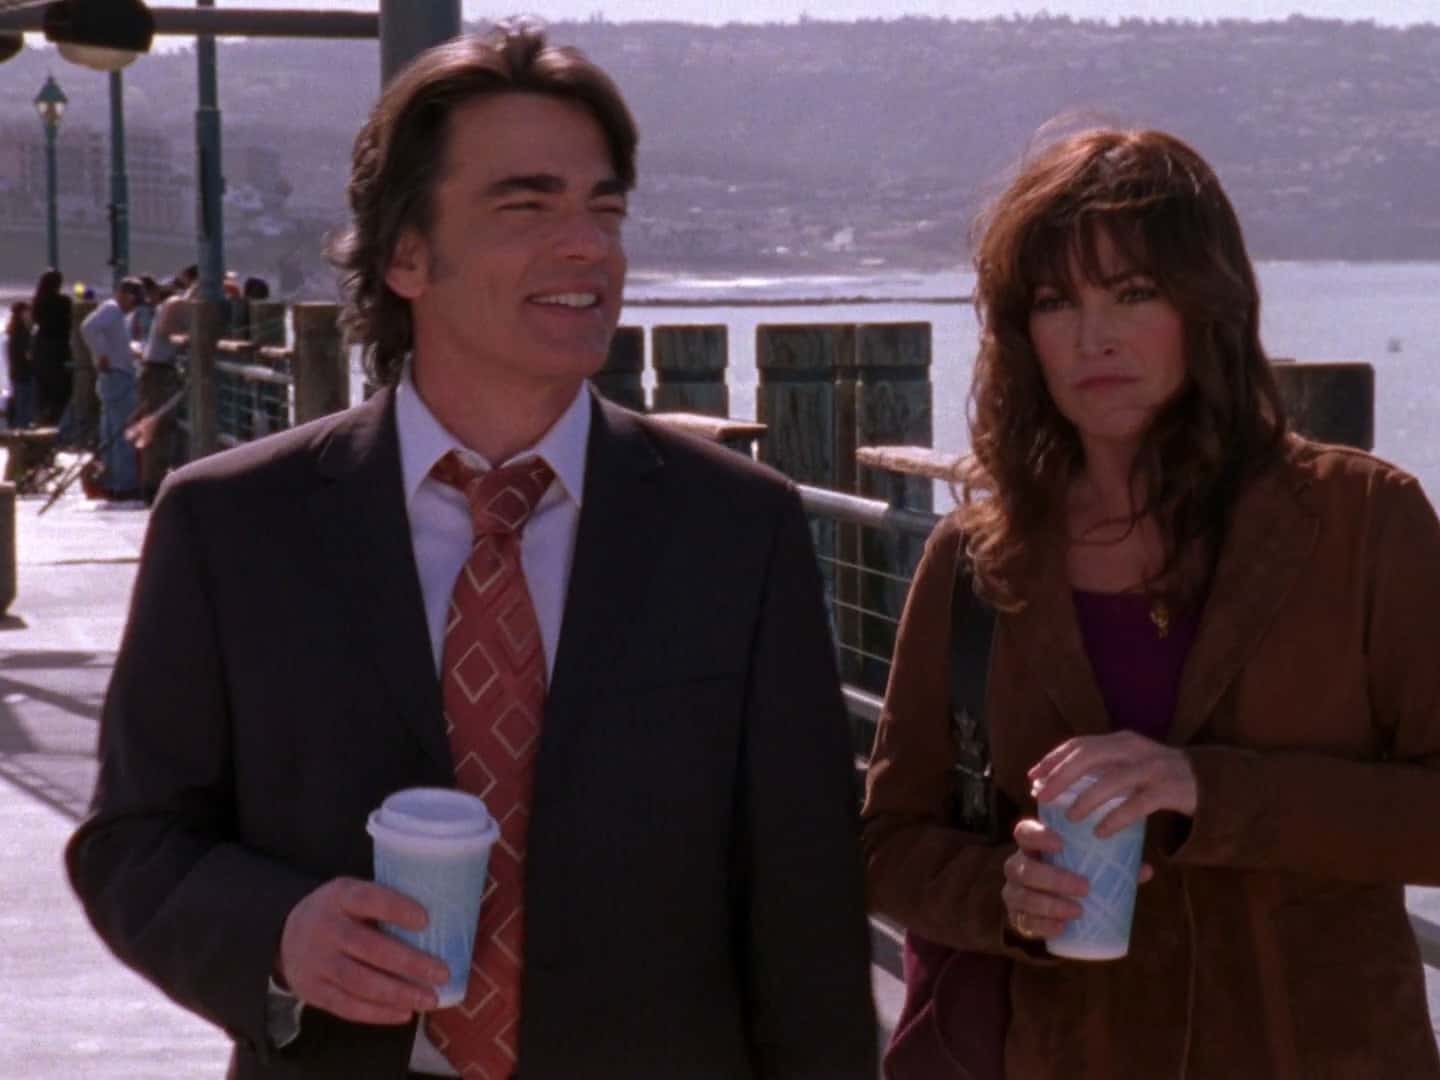 A man and a woman holding coffee cups in this image from Warner Bros. Studios